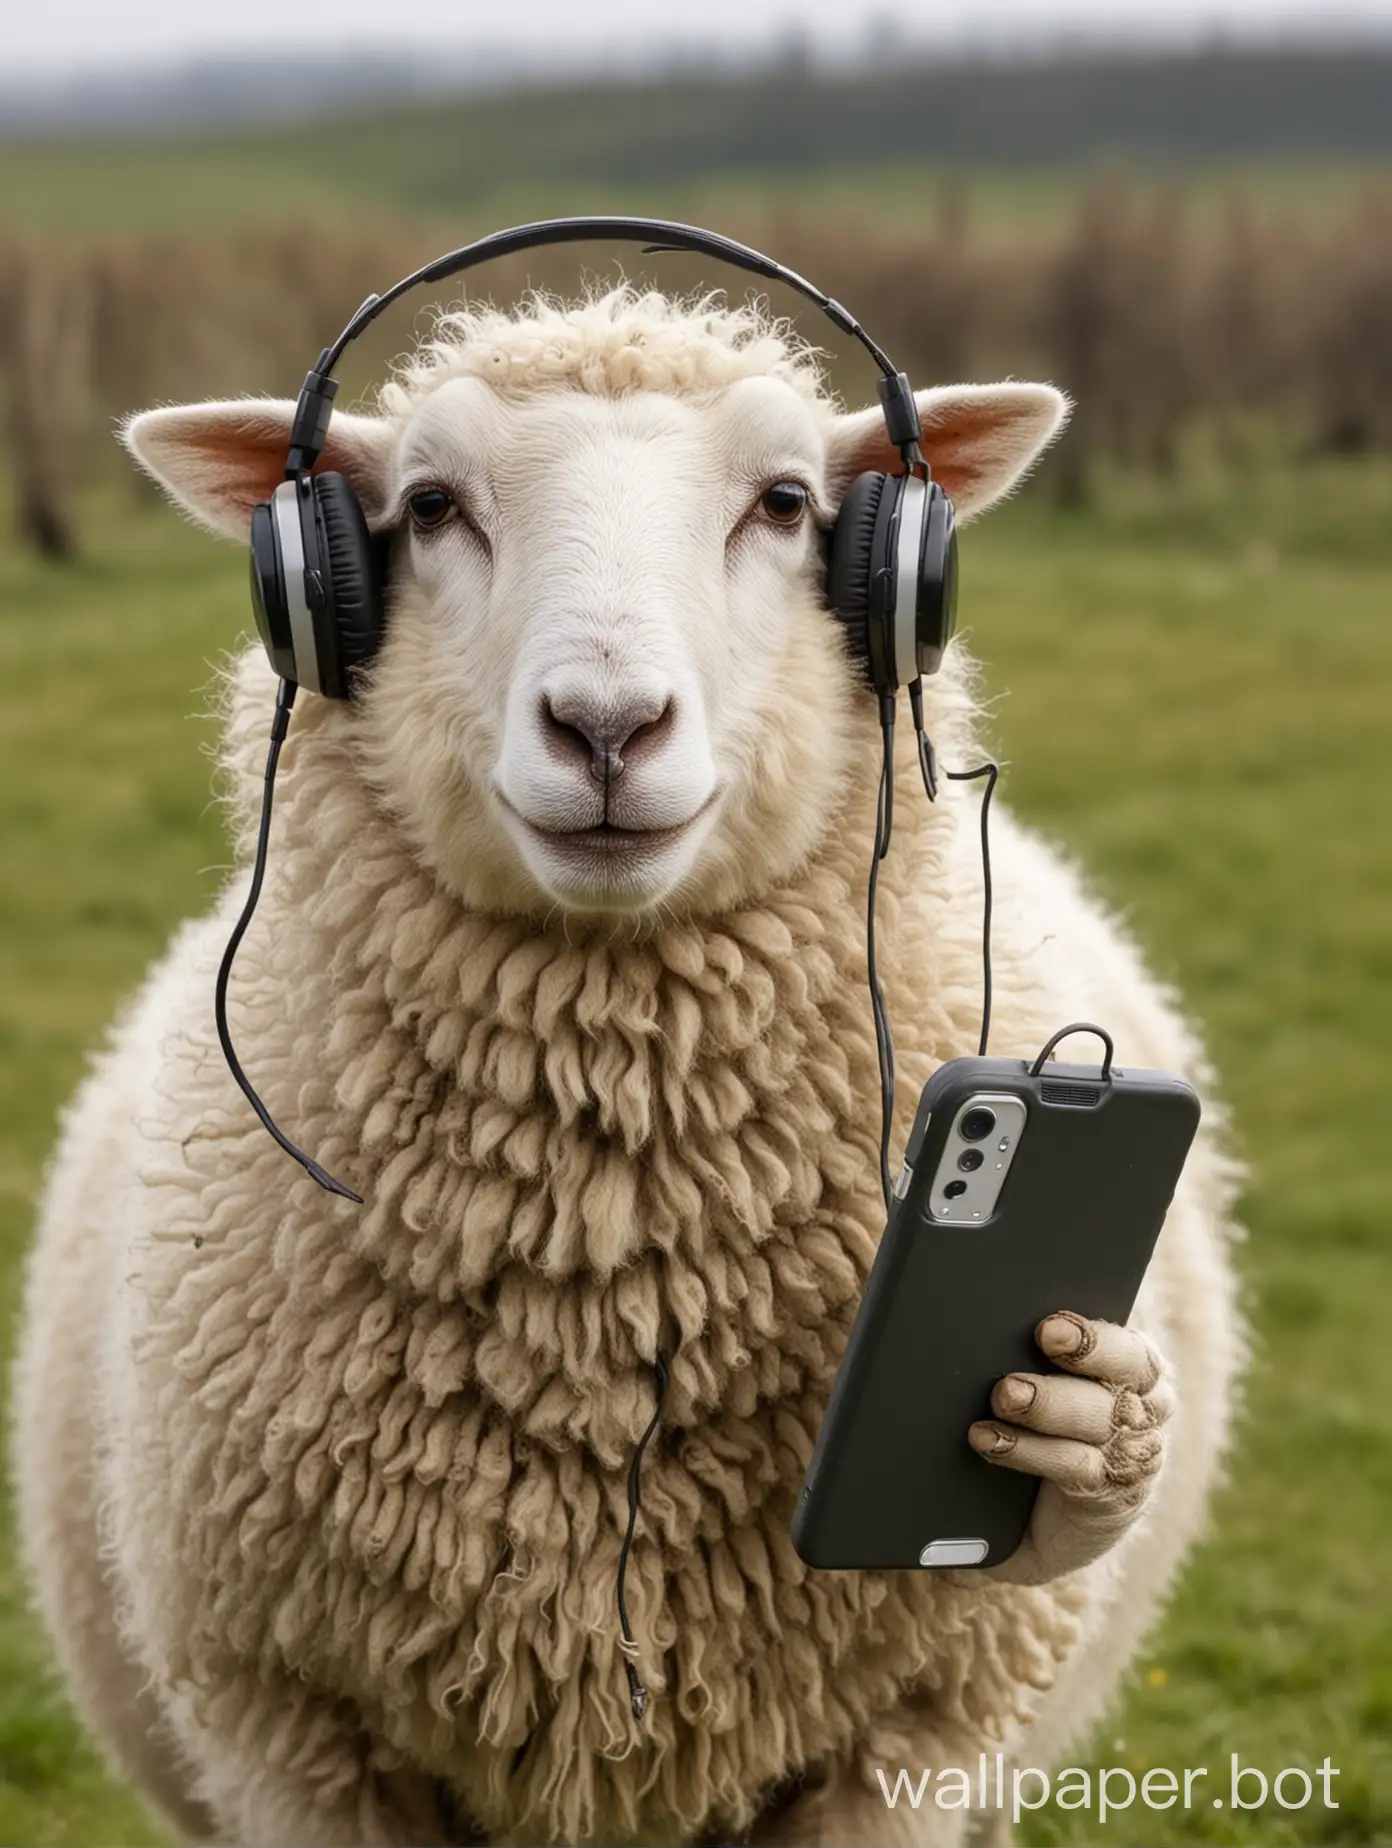 One sheep holding the mobile phonenHe puts headphones on his ears